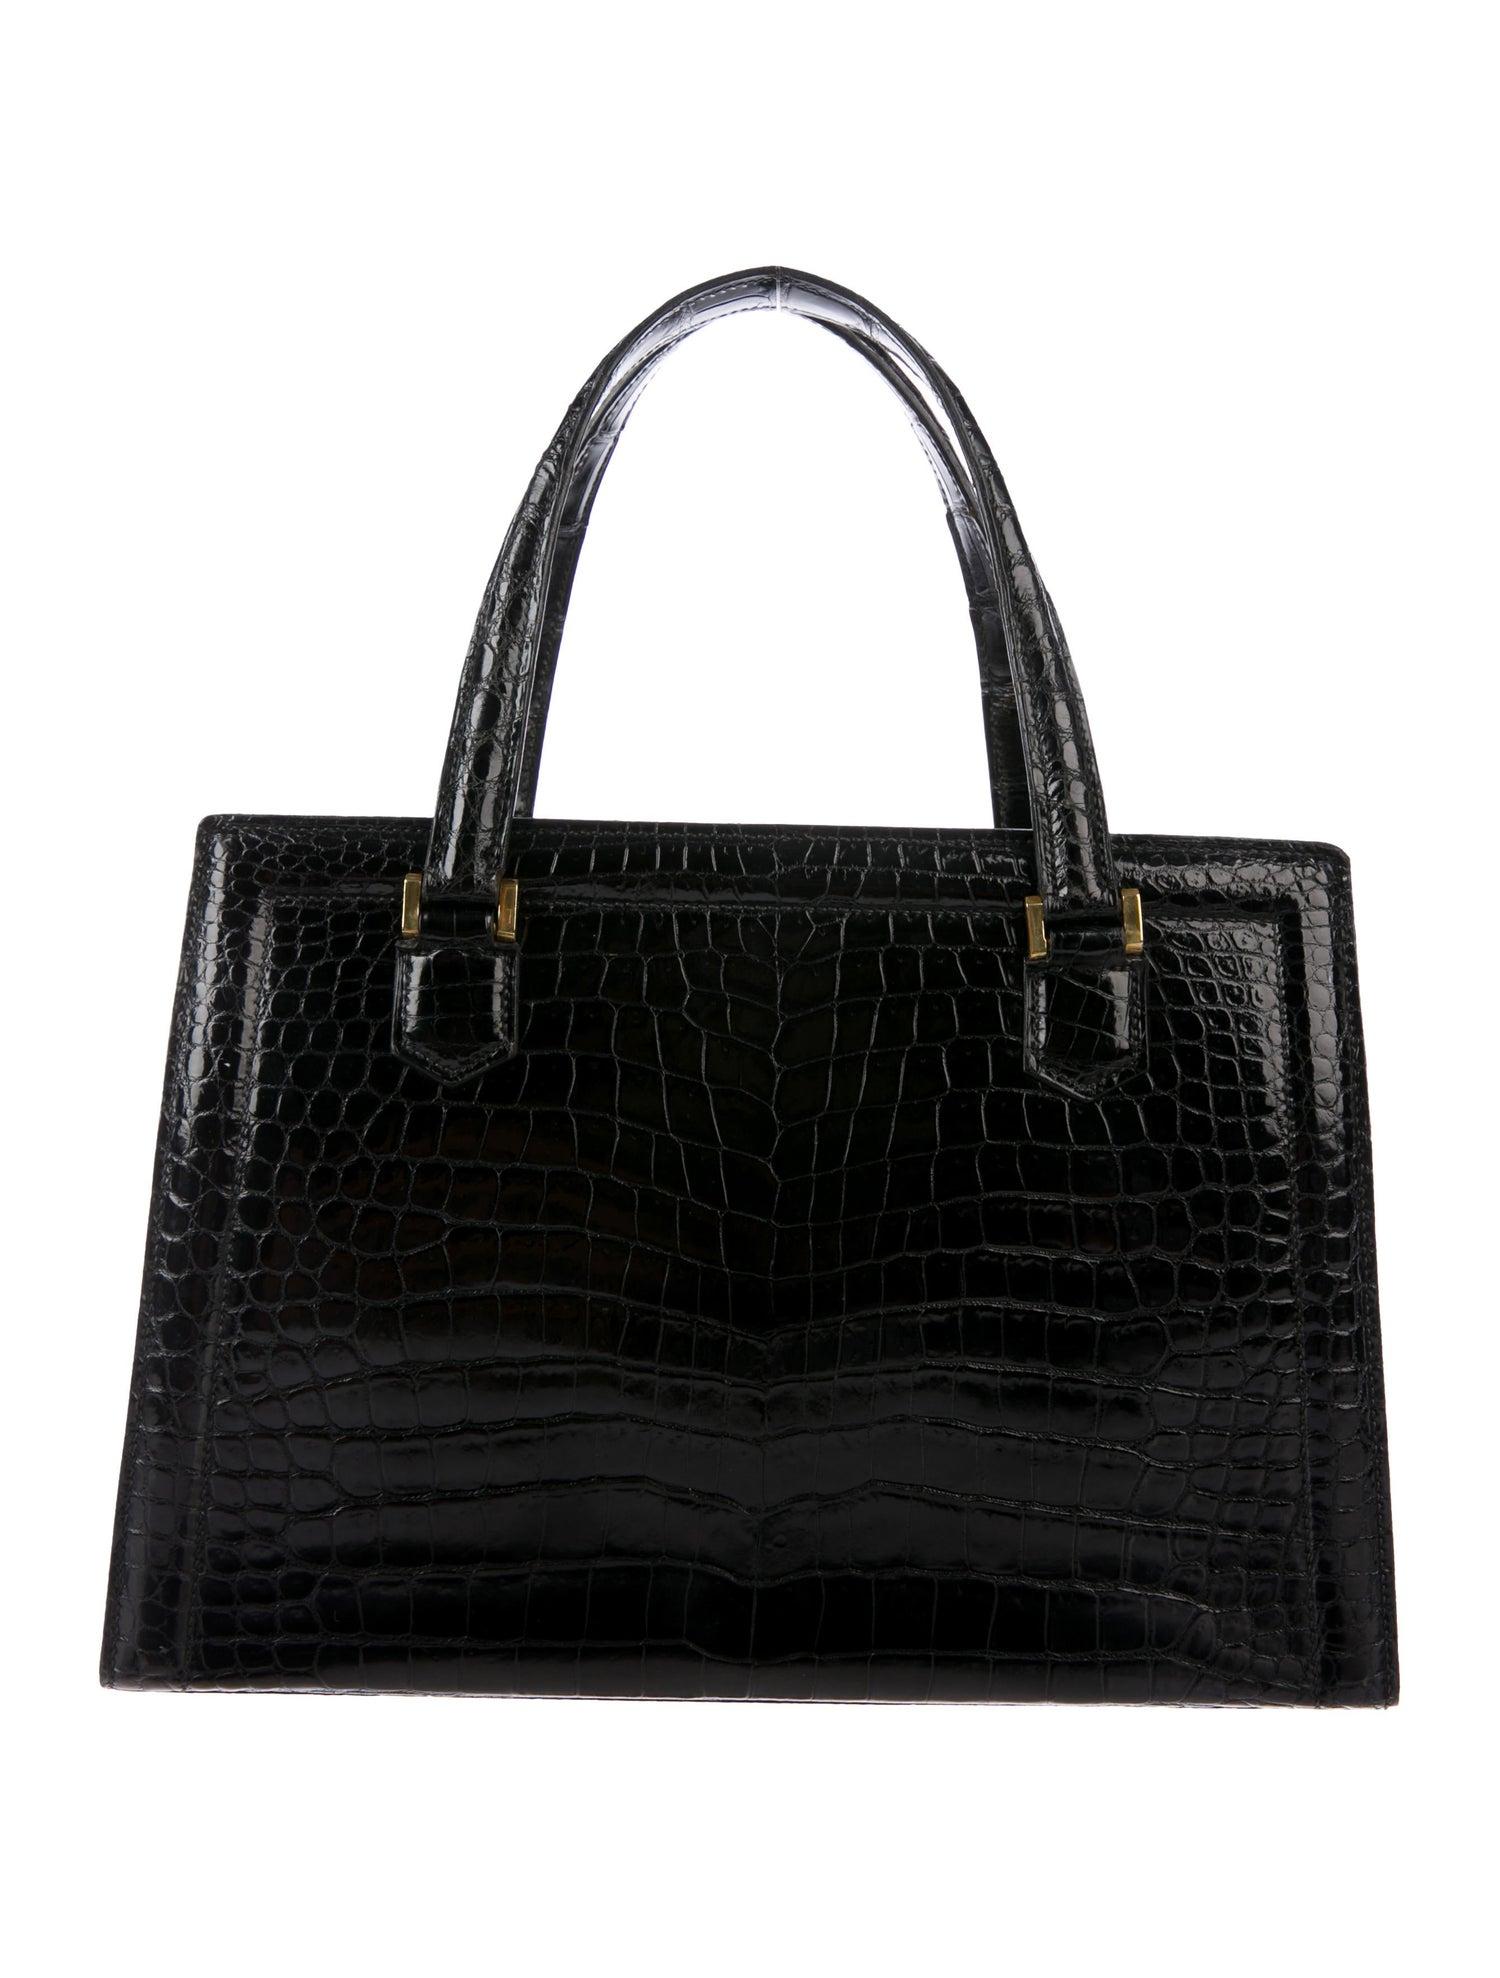 Hermes Black Crocodile Gold Kelly Style Top Handle Satchel Evening Flap Bag In Good Condition In Chicago, IL